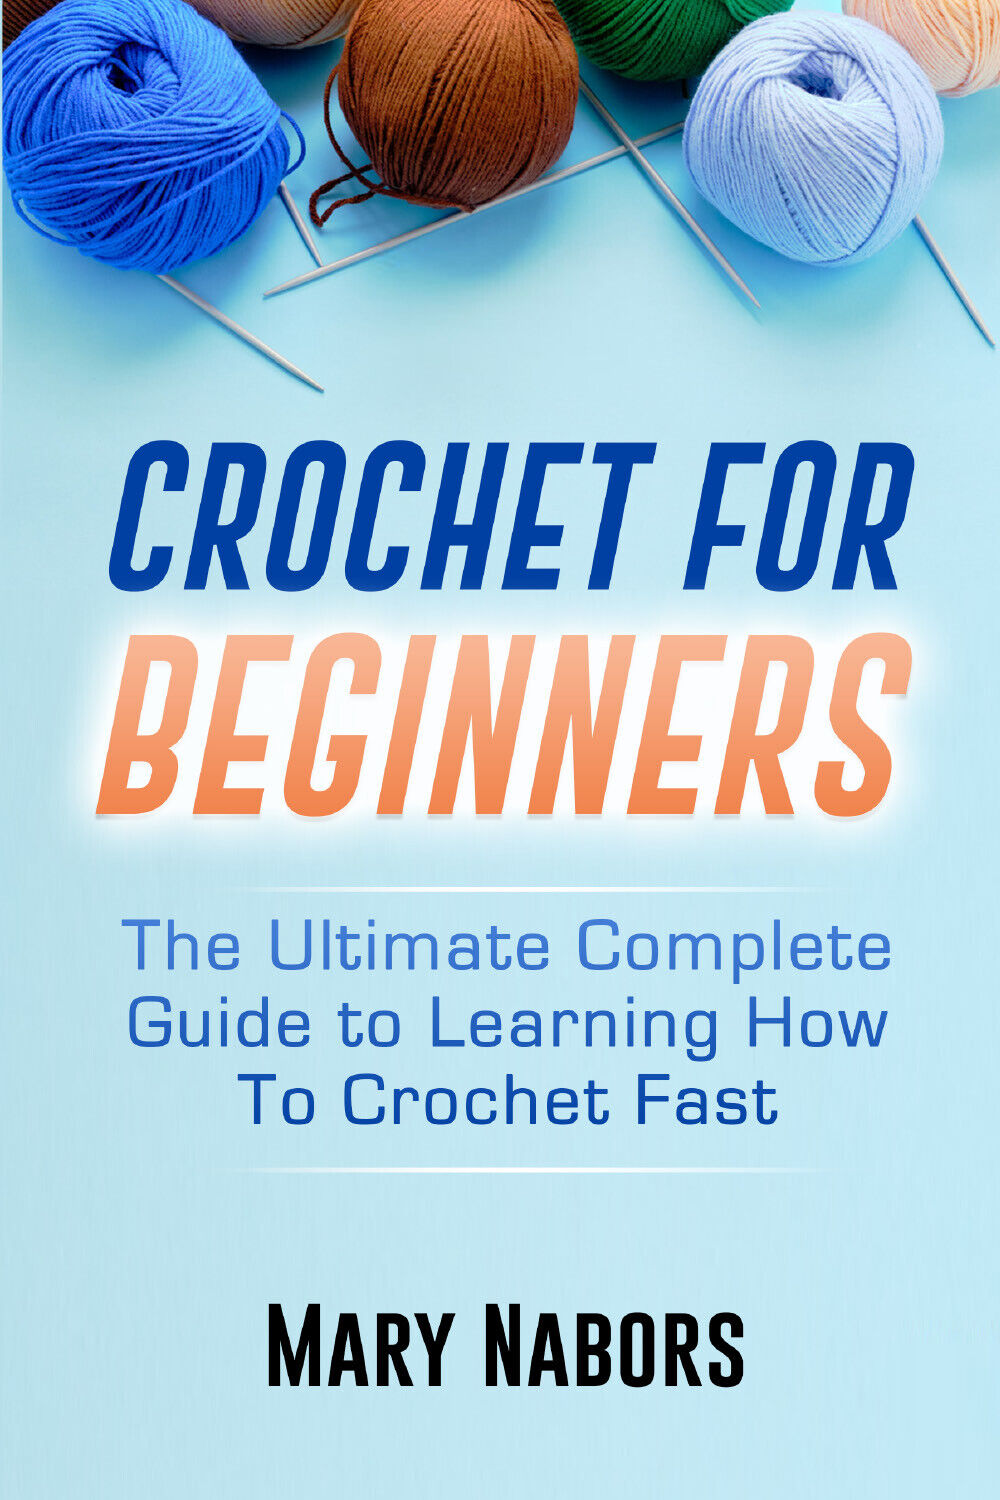 Crochet for beginners di Mary Nabors,  2021,  Youcanprint